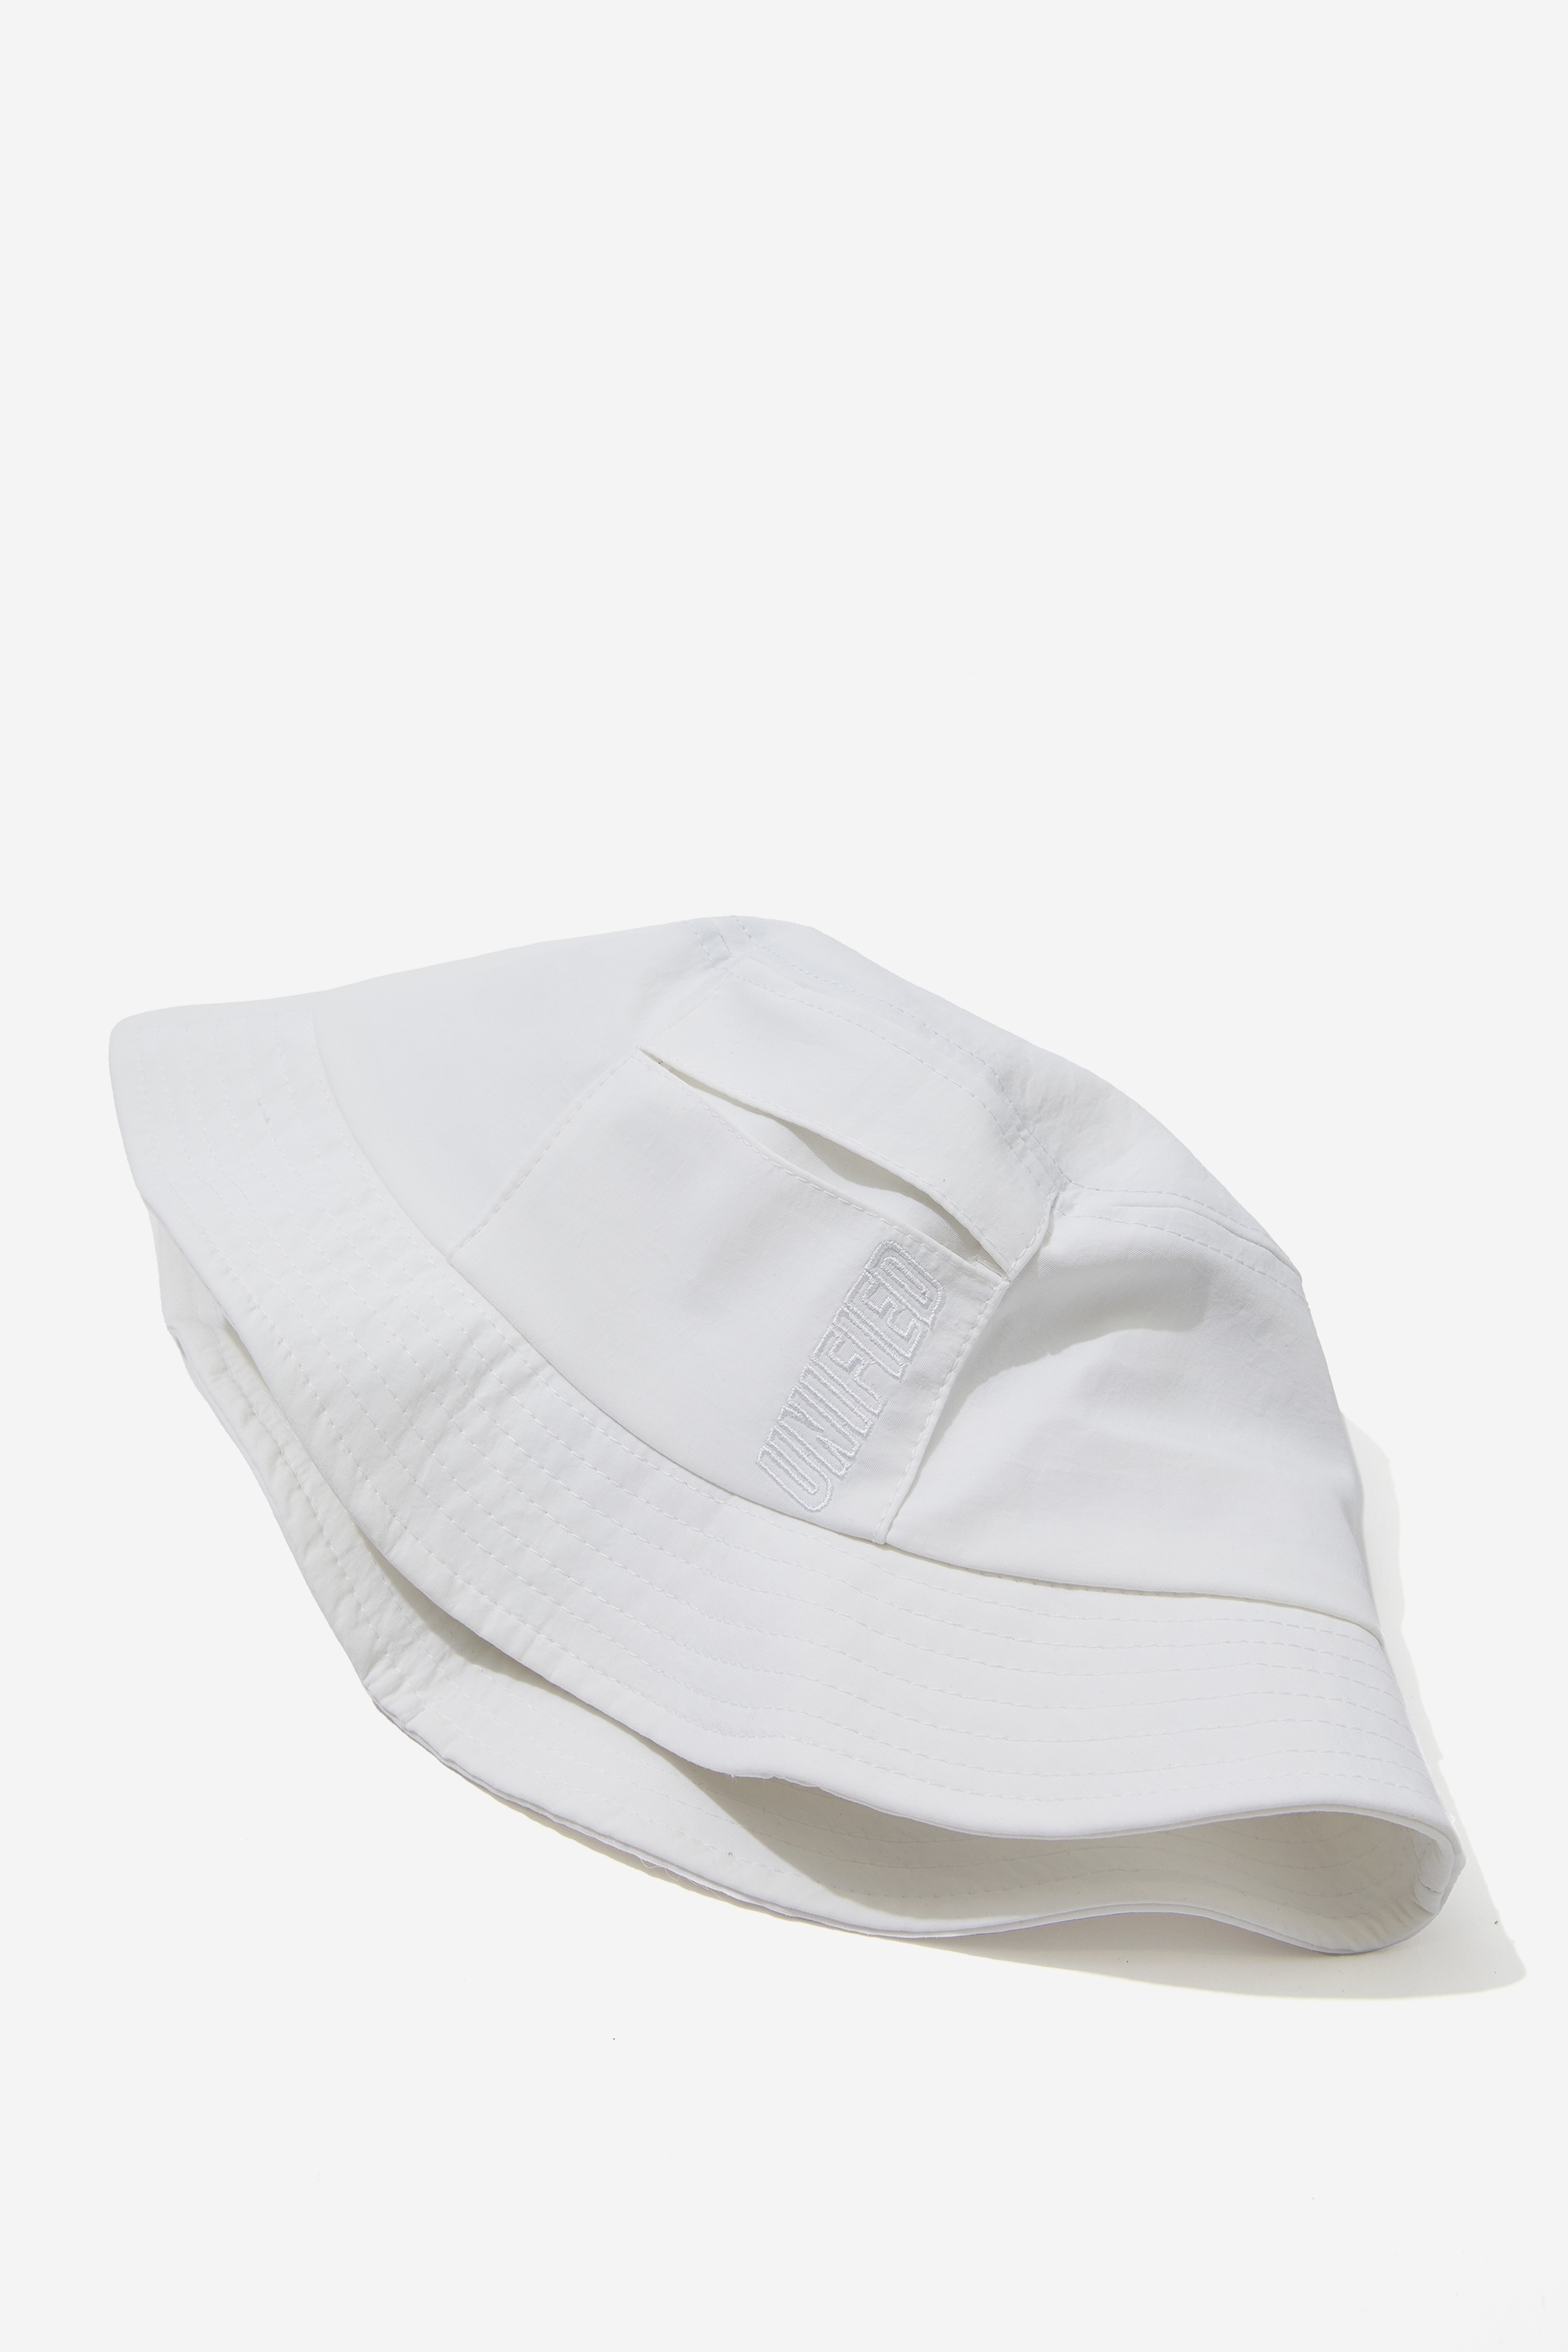 Unified Collective Pocket Bucket Hat